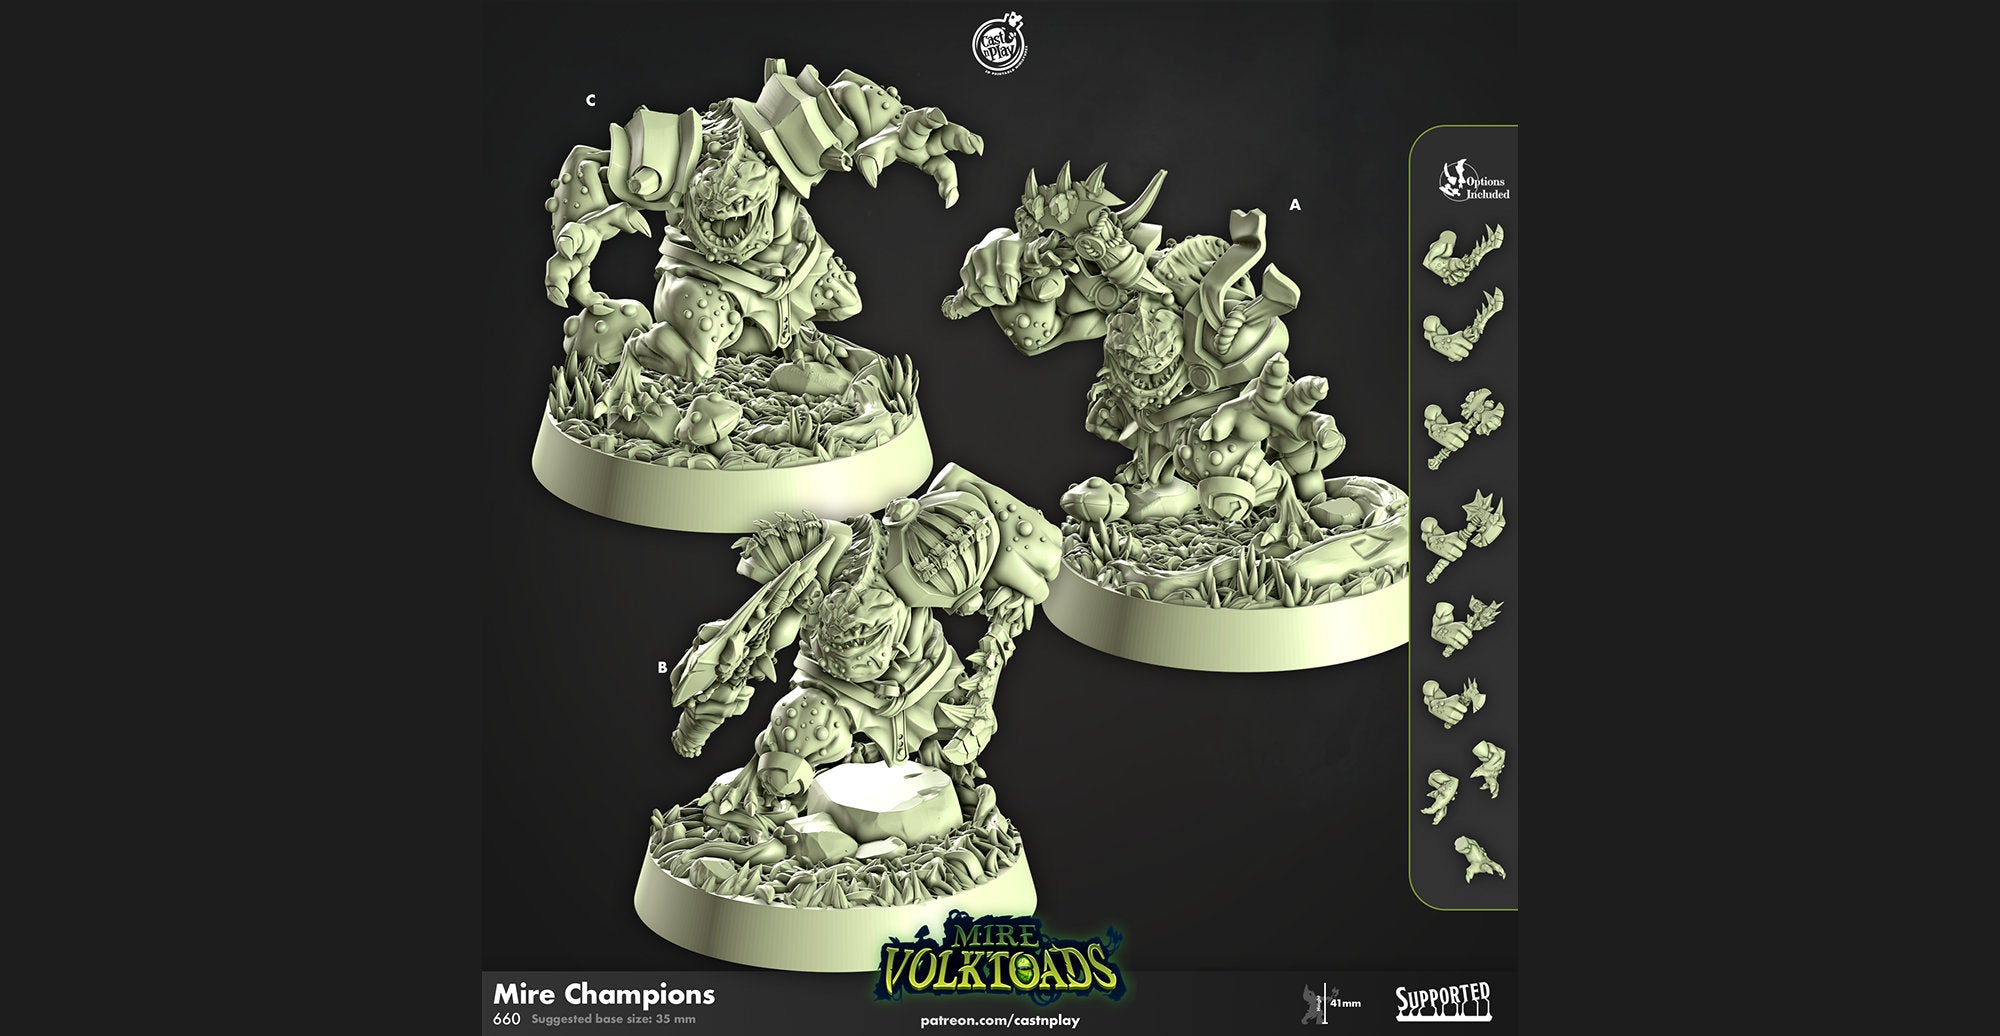 SLAAD "Mire champions" 3 Versions | Dungeons and Dragons | DnD | Pathfinder | Tabletop | RPG | ttrpg | Wargaming | Warhammer | 28-32 mm-Role Playing Miniatures